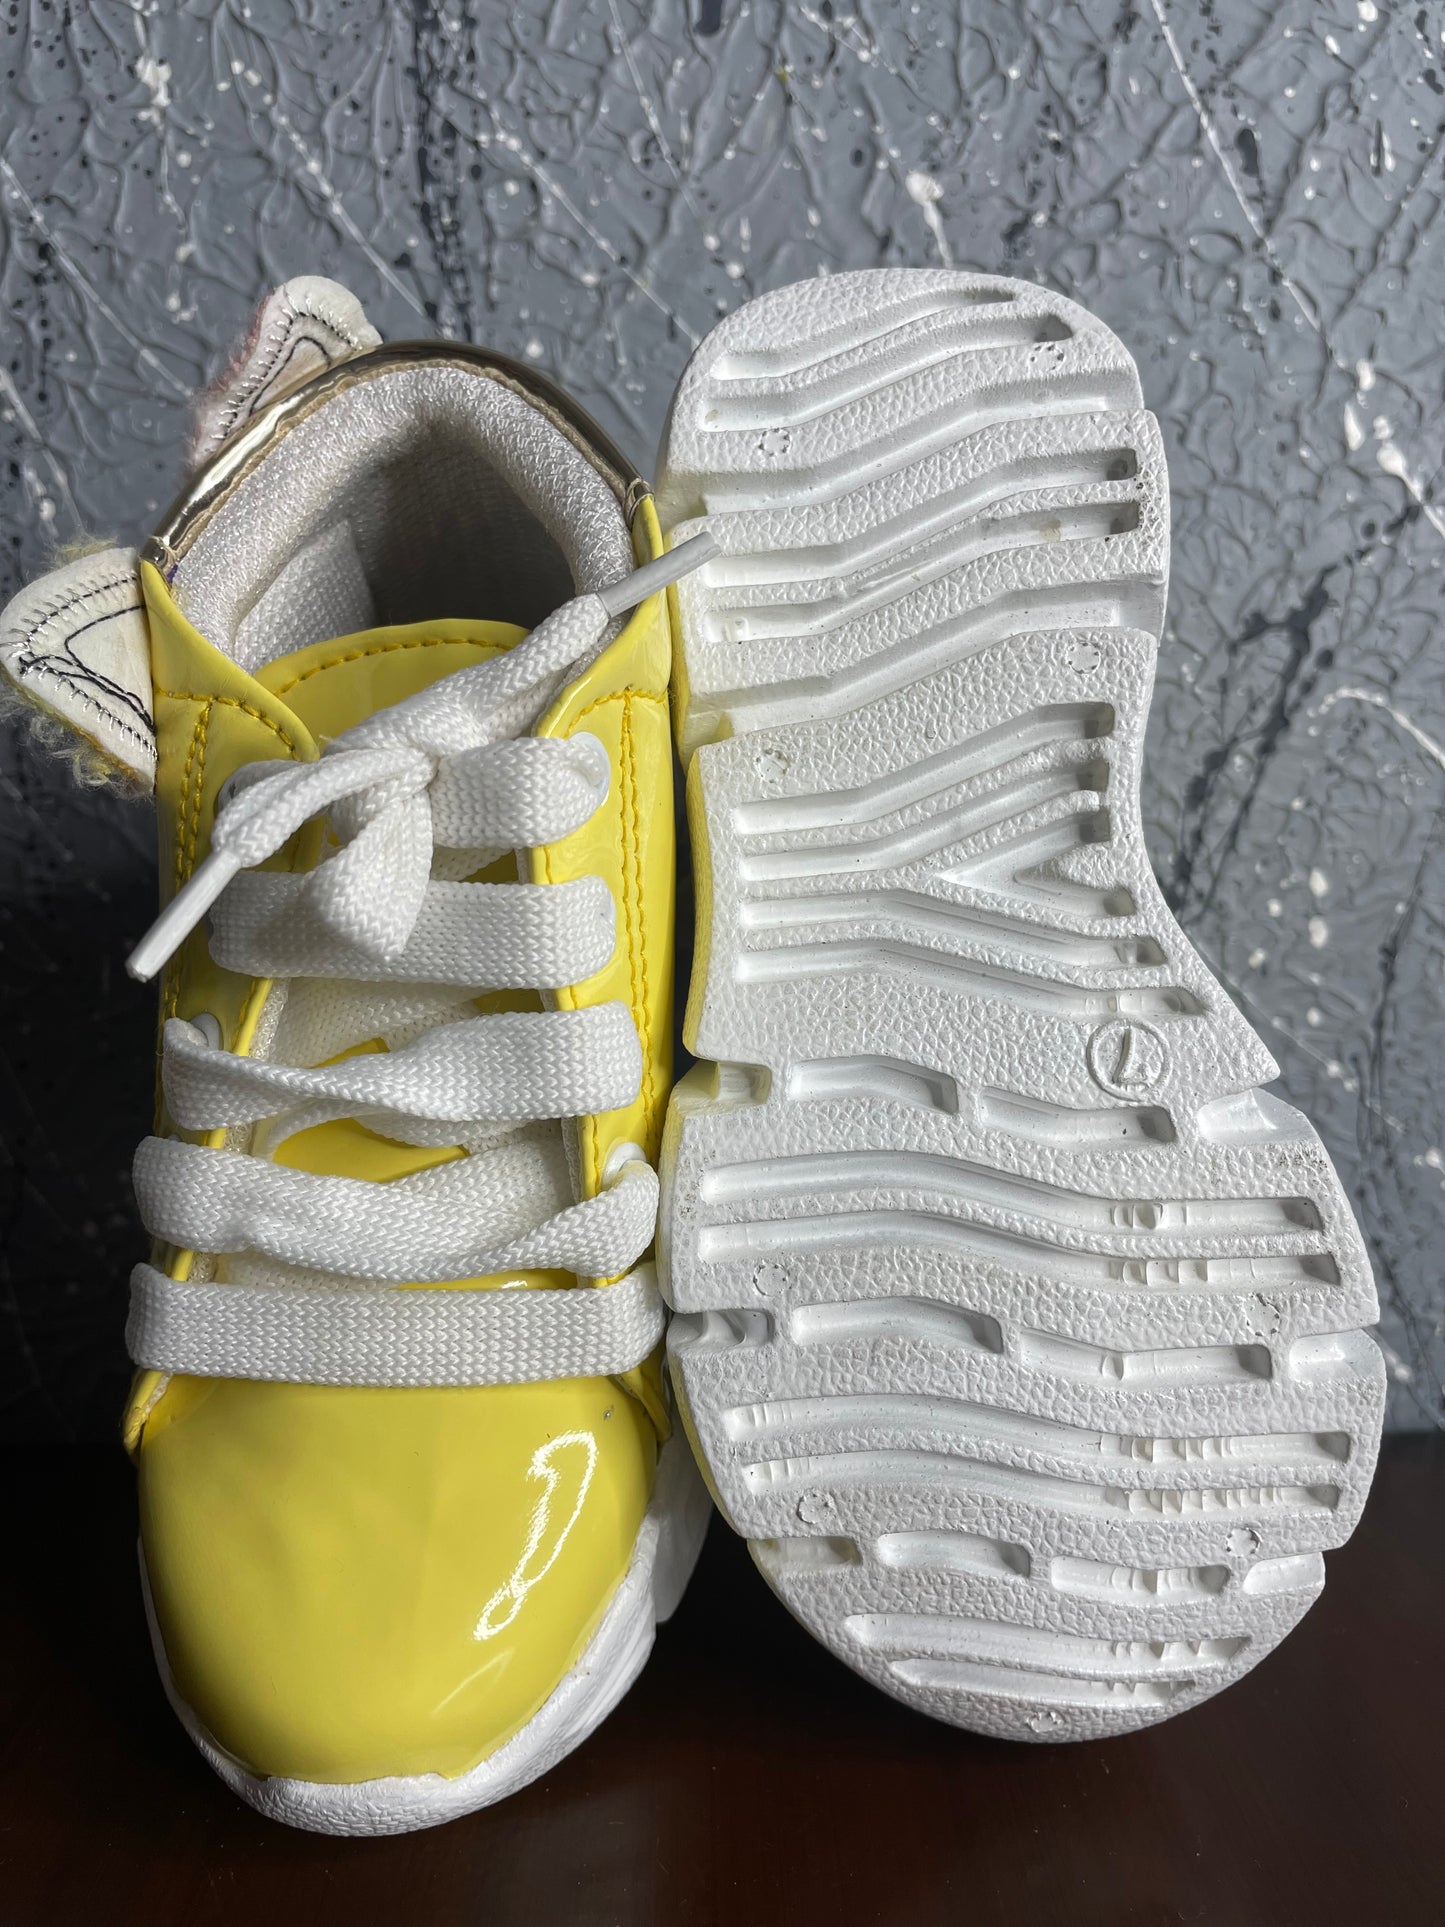 Toddler's Bright Yellow Playtime Shoe